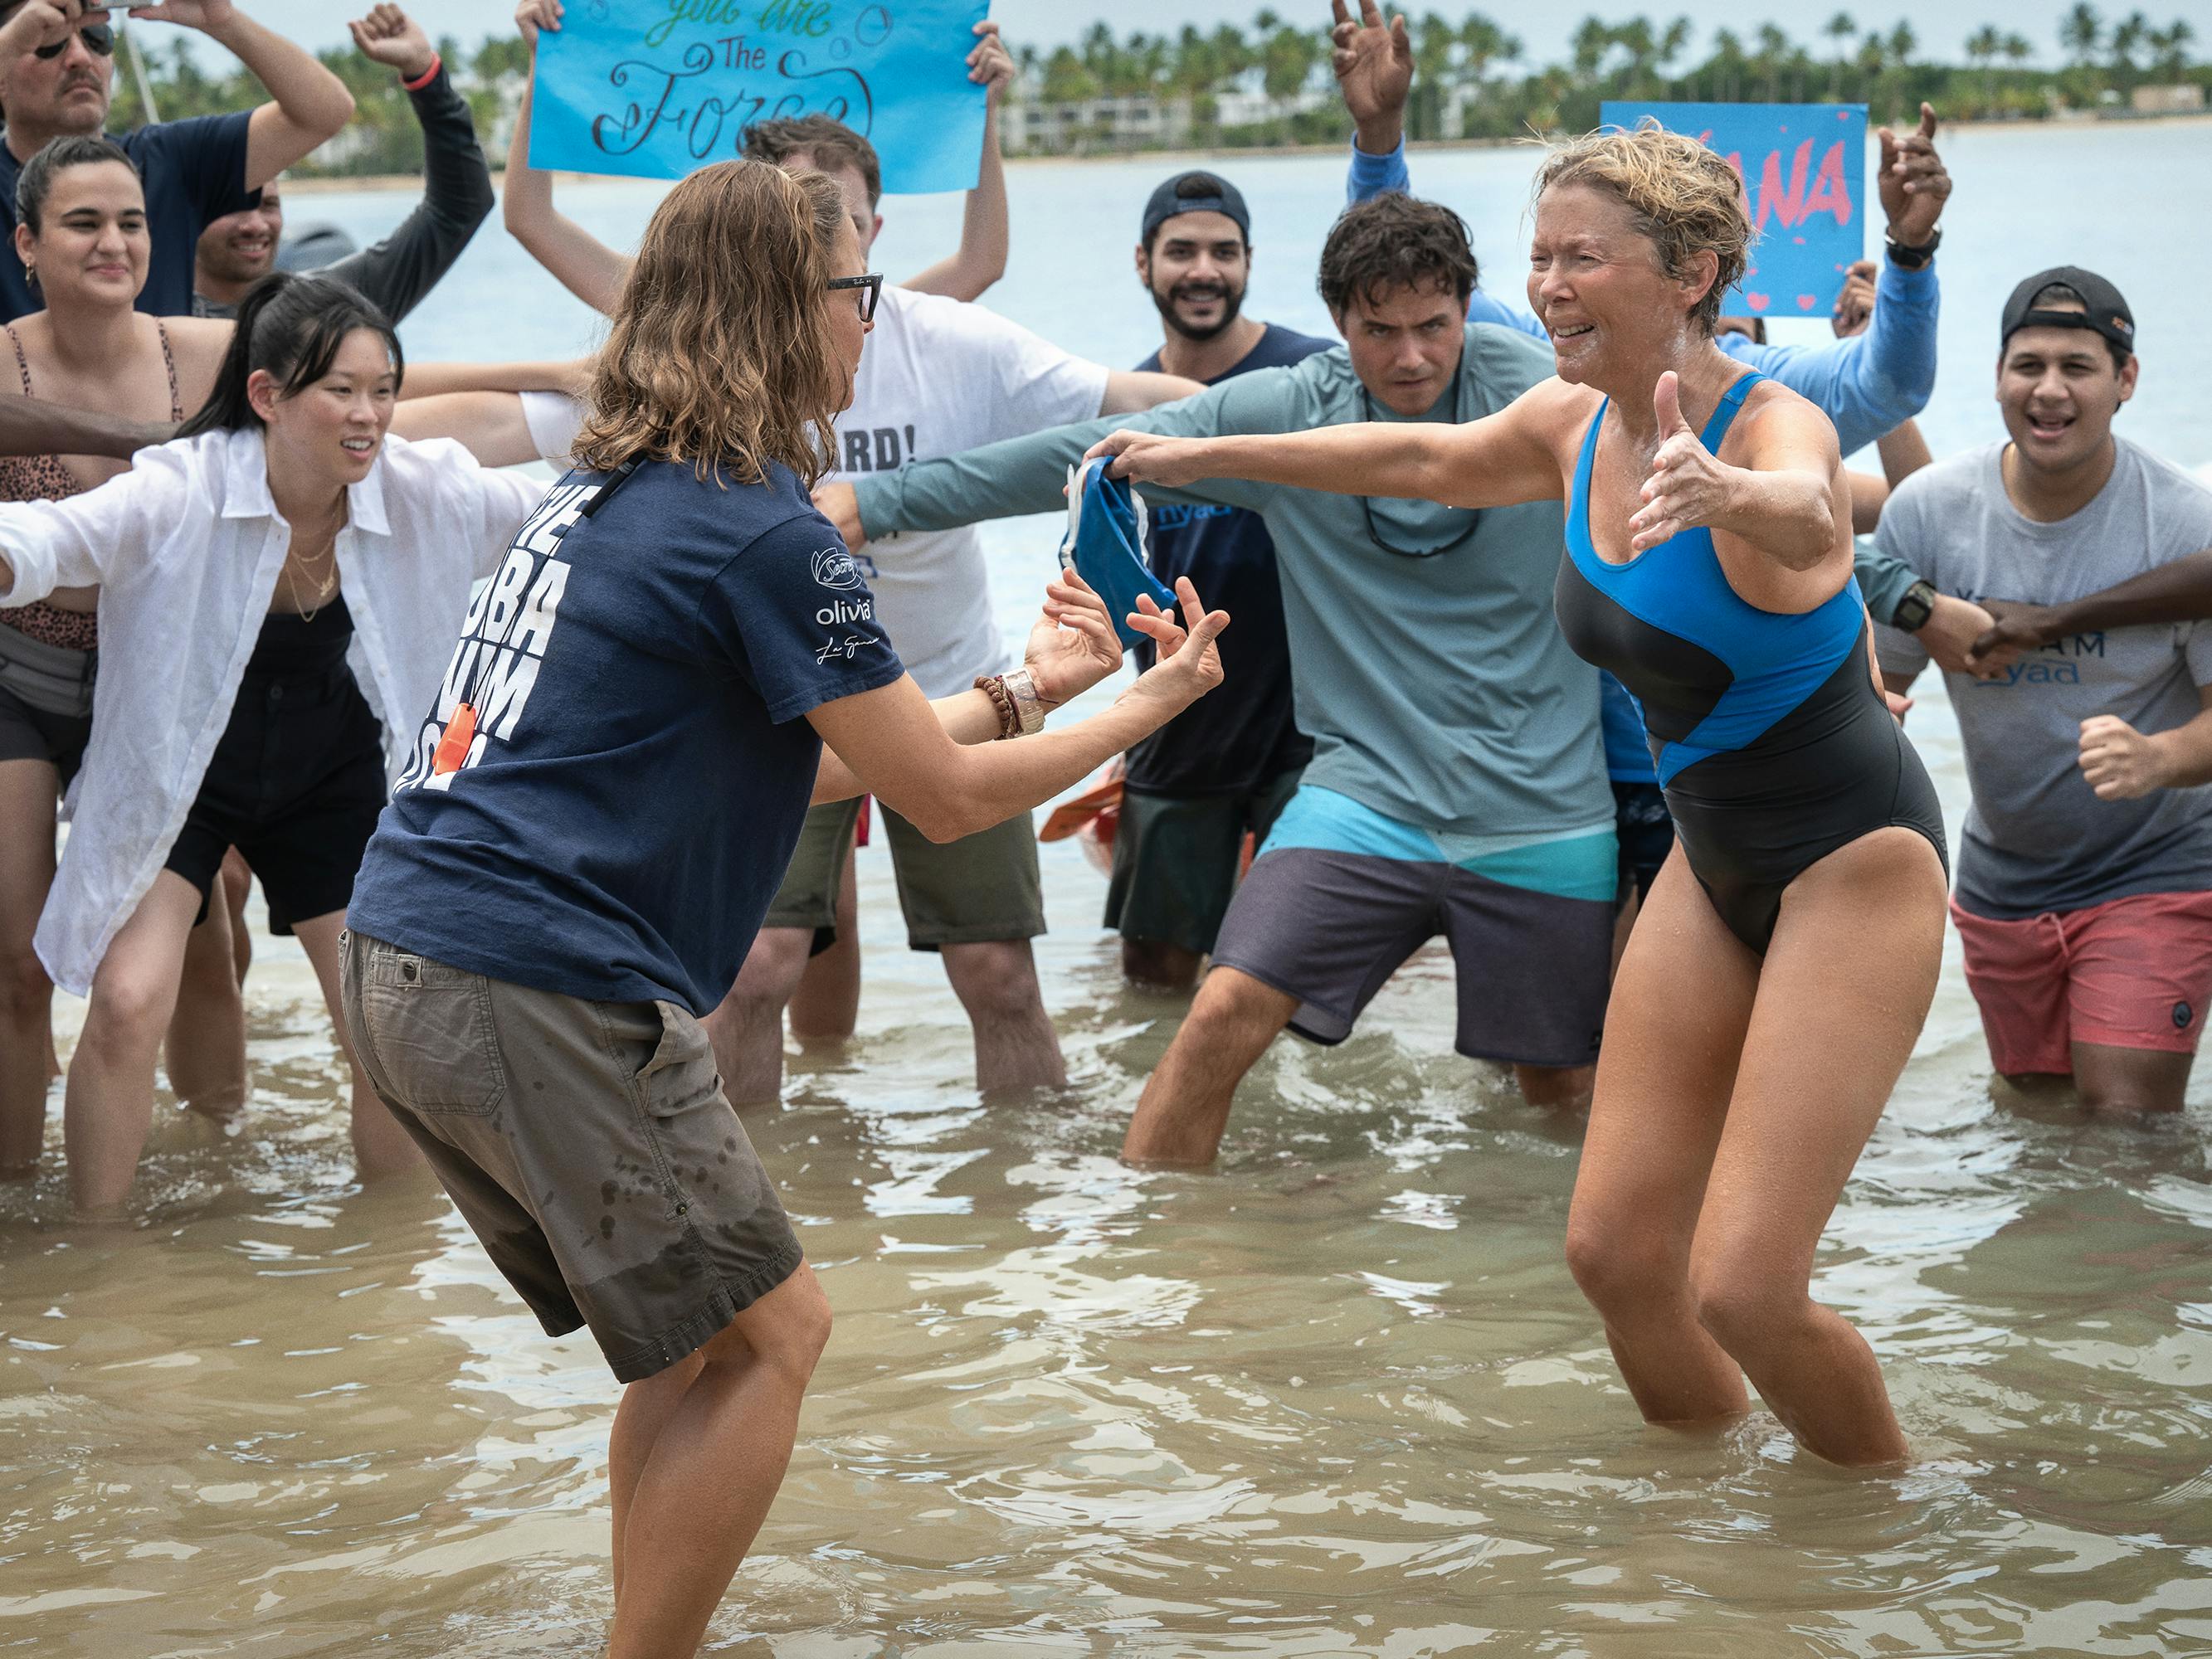 Bonnie Stoll (Jodie Foster) and Diana Nyad (Annette Bening) embrace in ankle-deep water.